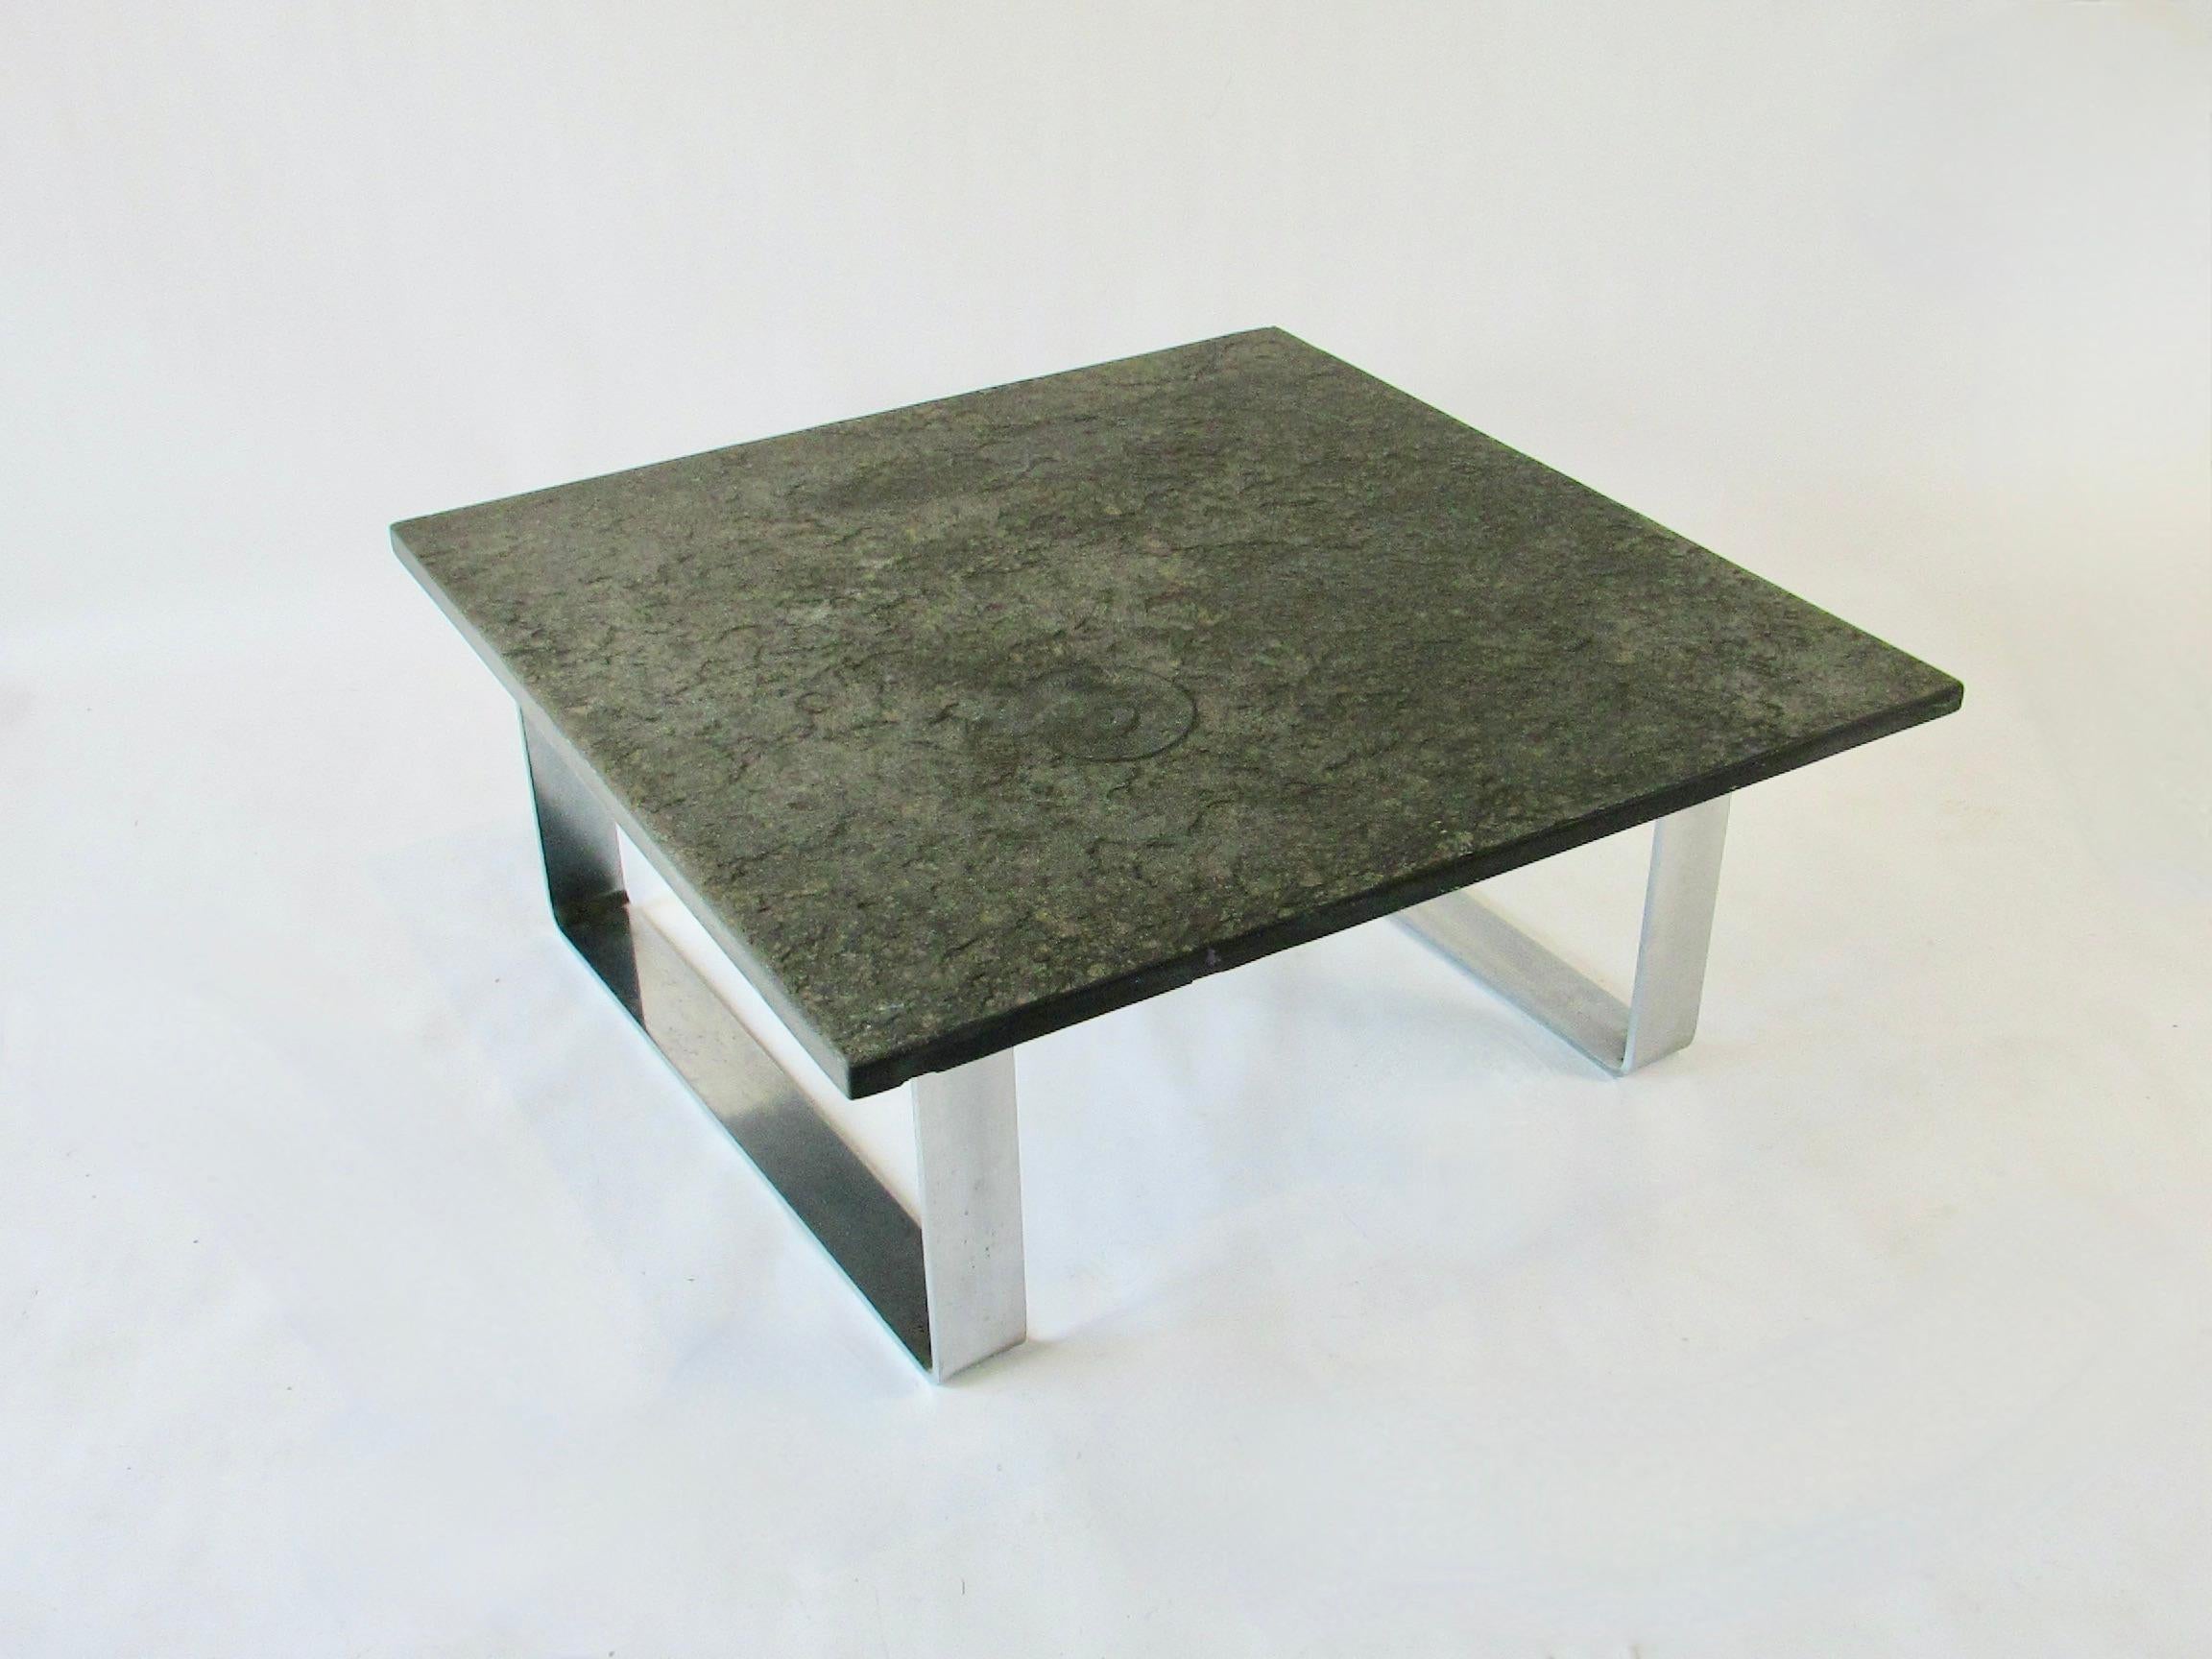 Thick slate top table with Ammonite fossil on chrome base For Sale 2